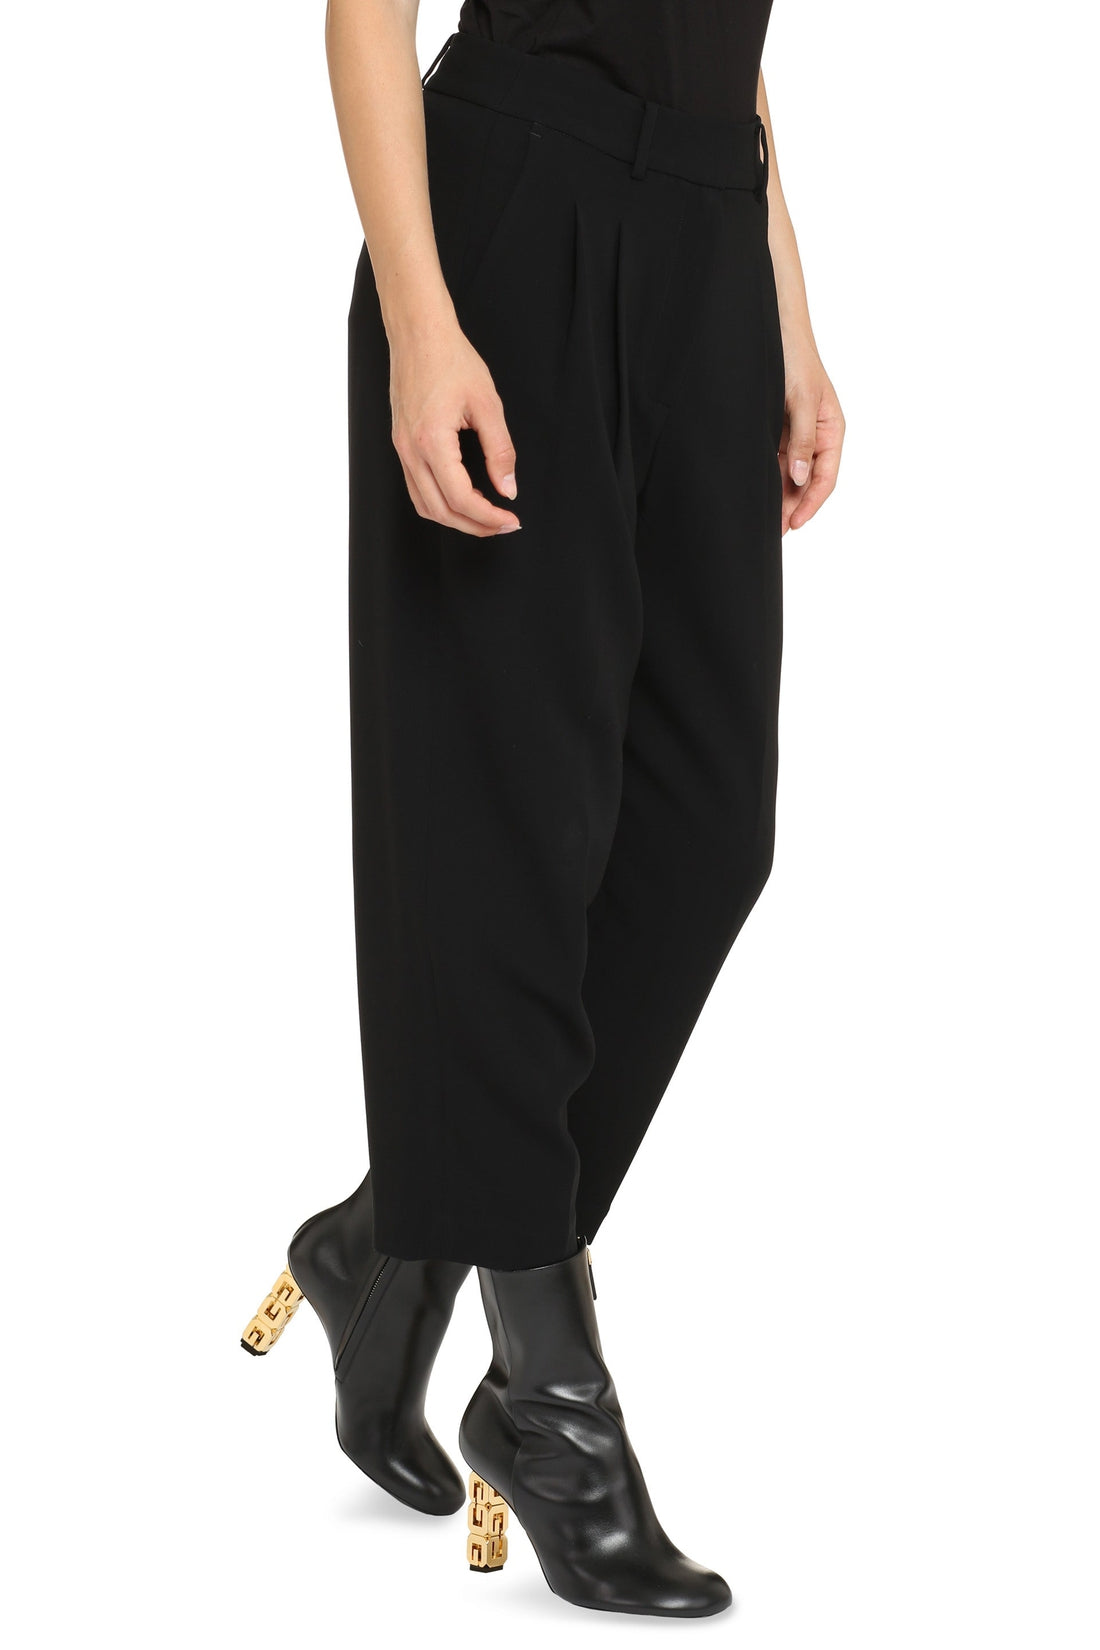 MICHAEL MICHAEL KORS-OUTLET-SALE-High-waisted cropped trousers-ARCHIVIST